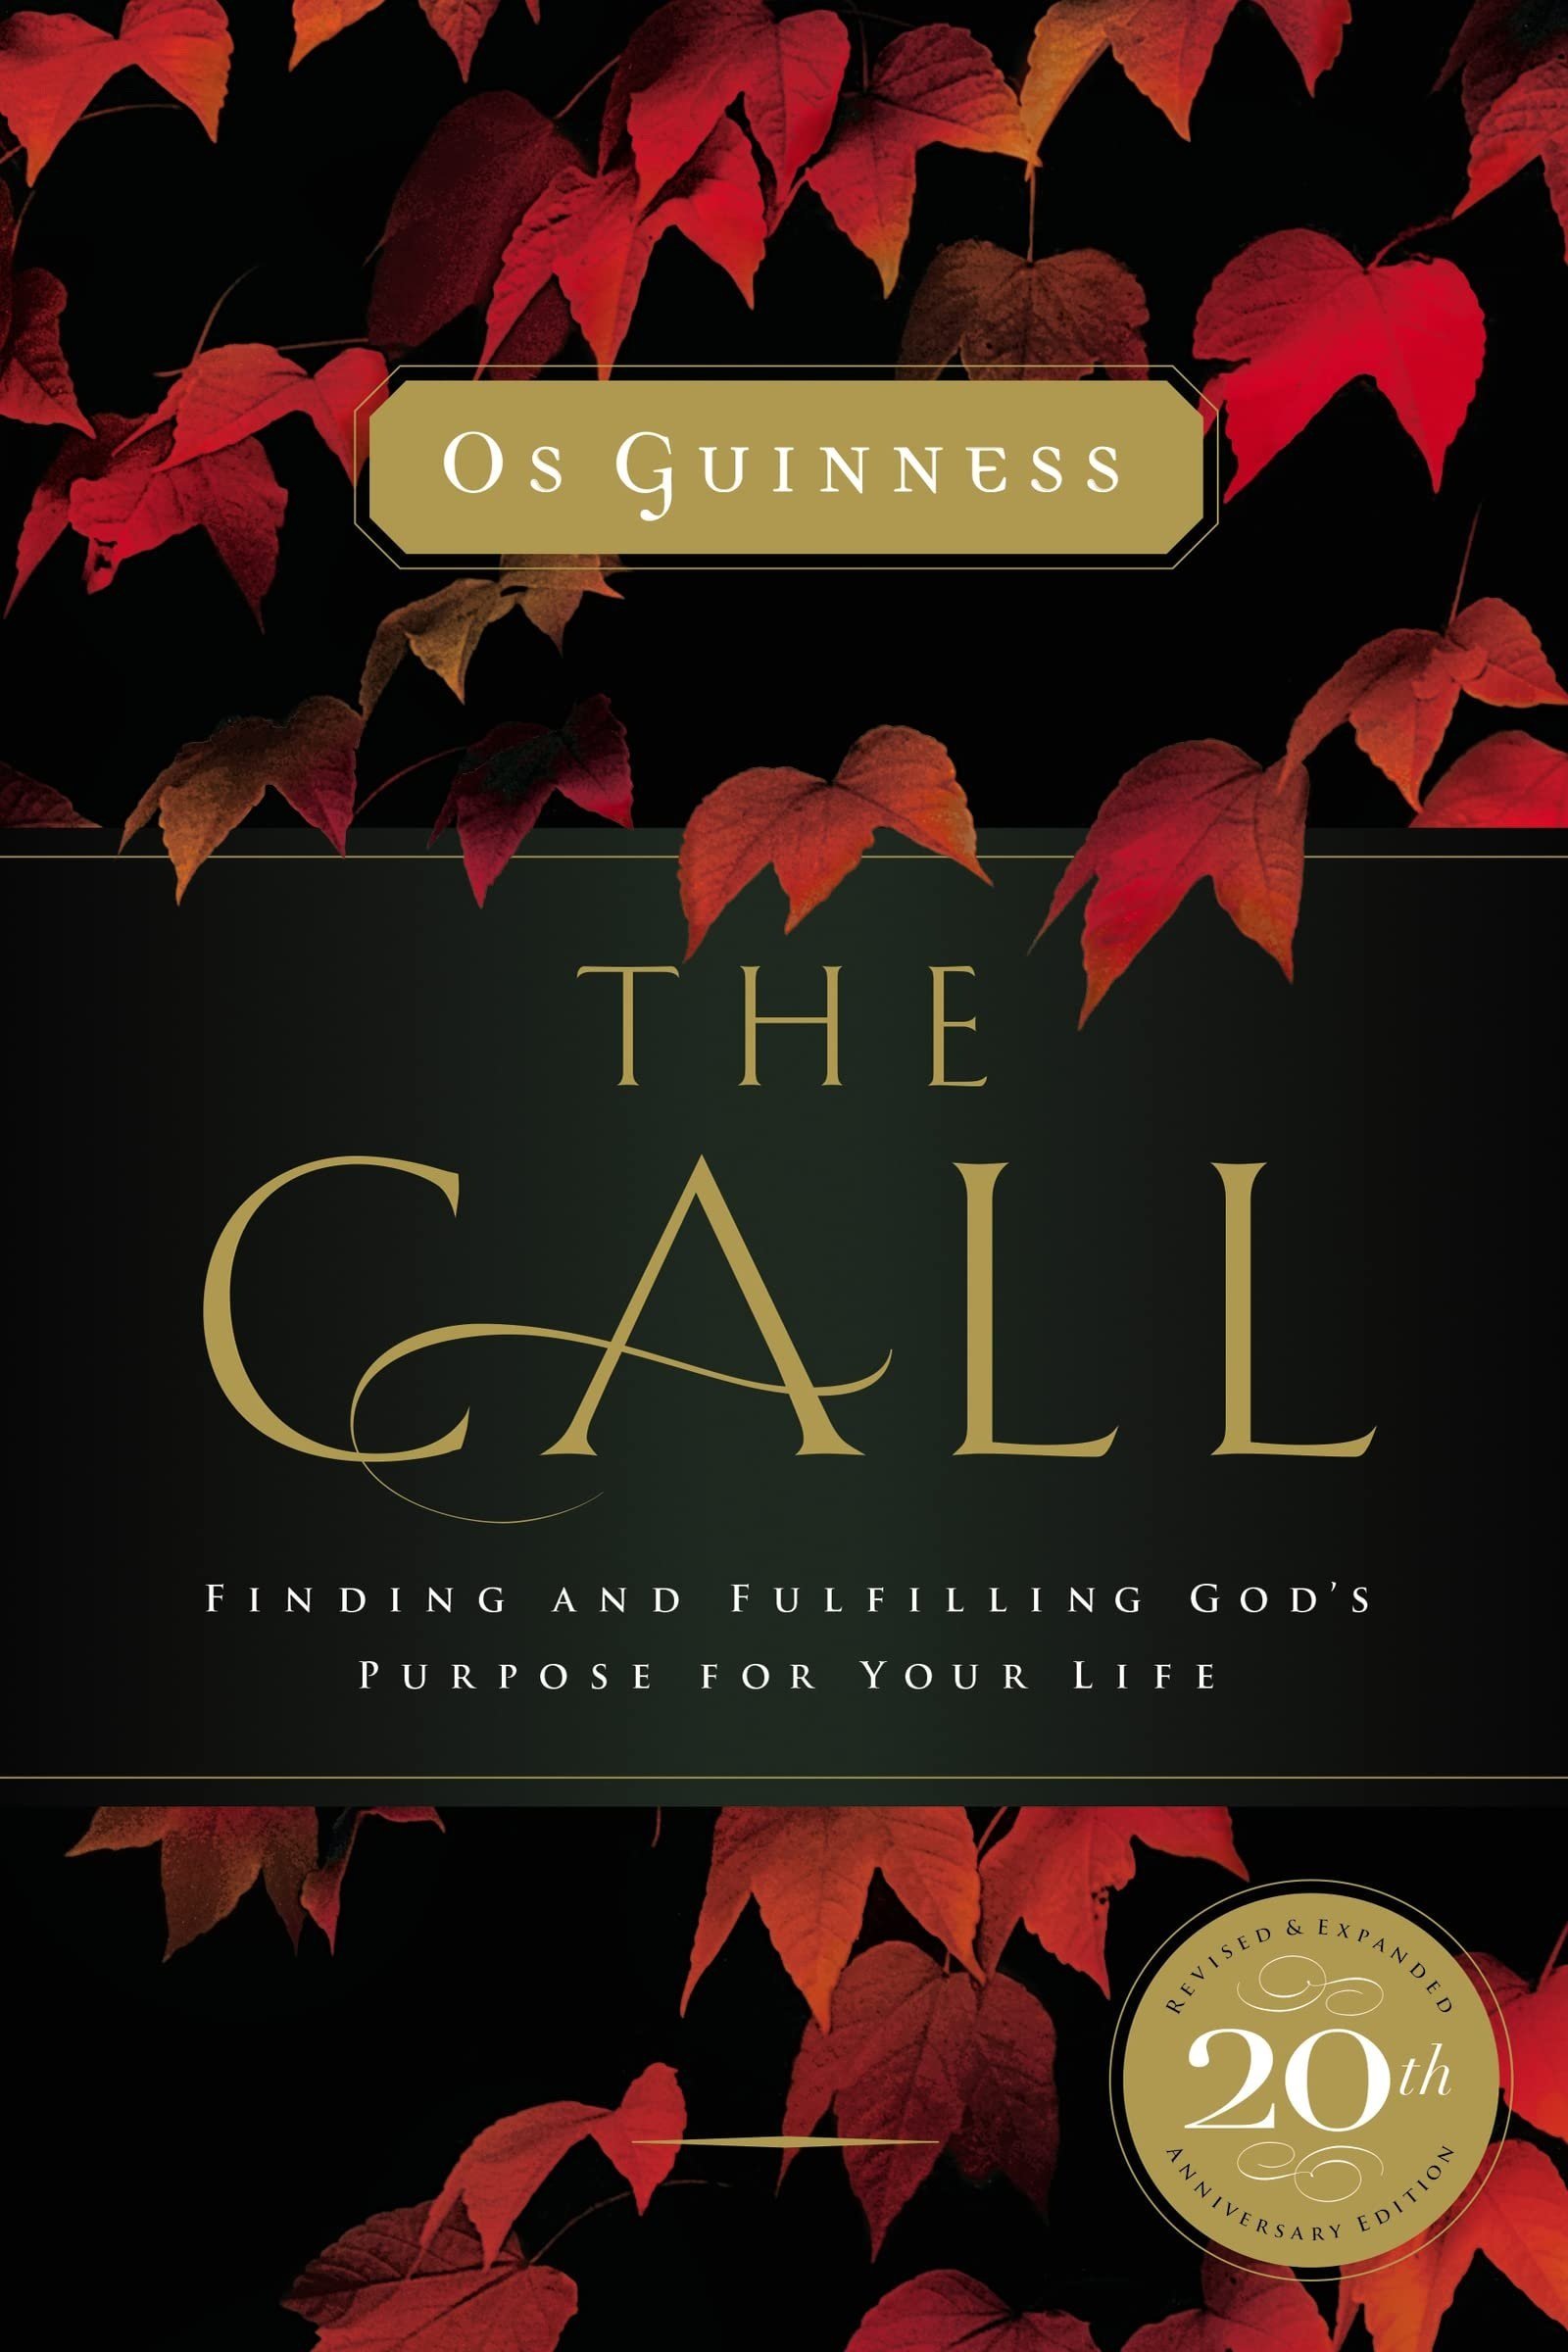 The+Call+by+Os+Guinness.jpg